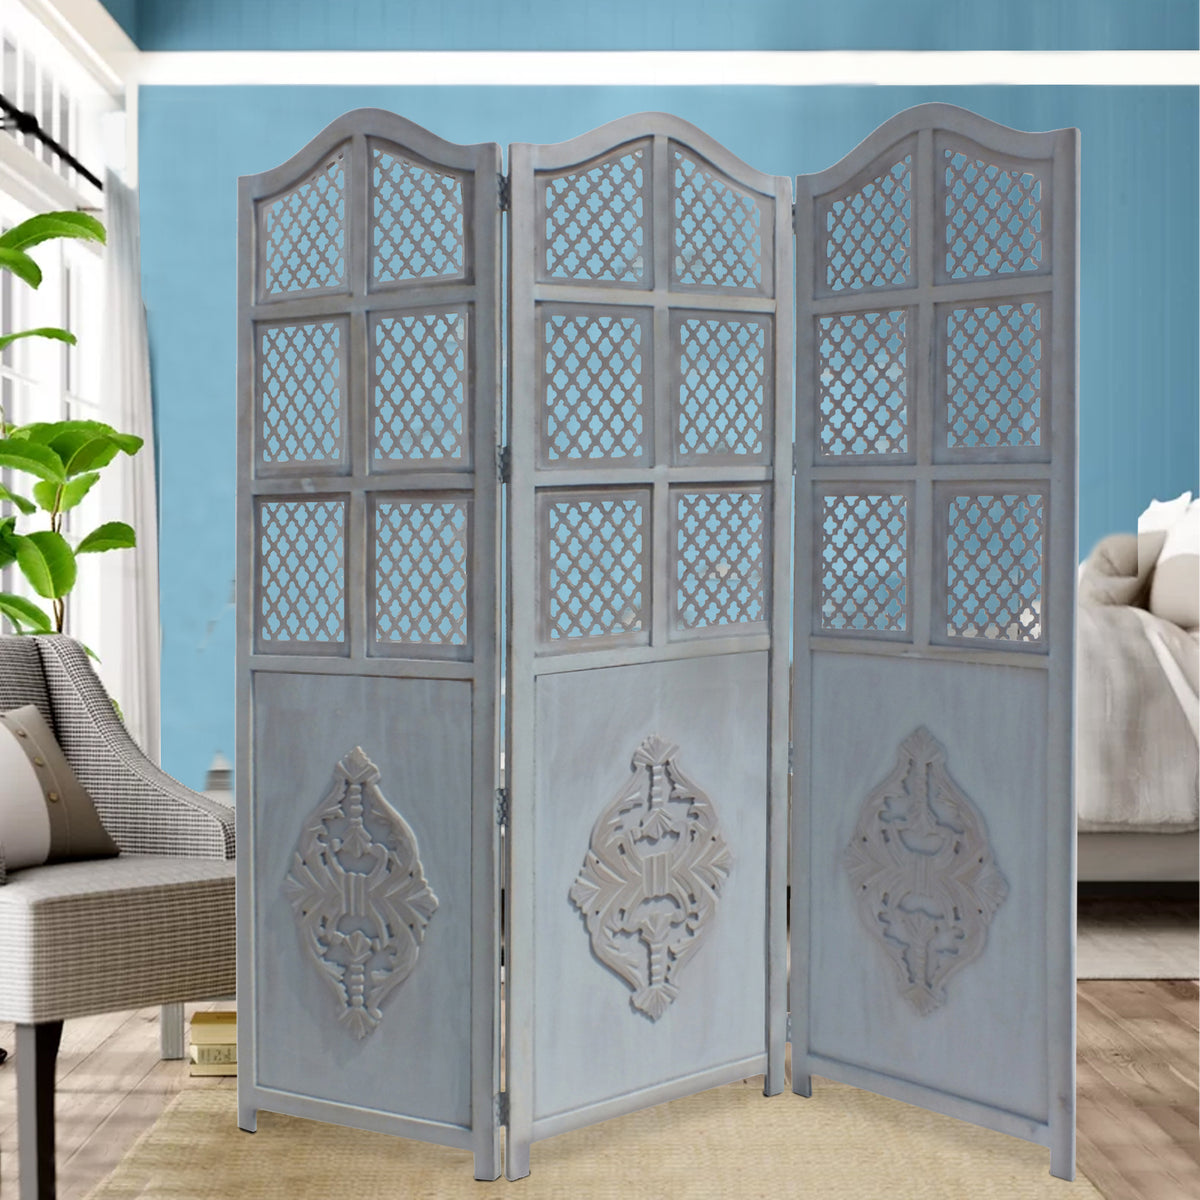 Hanging Room Divider Blue Marble Texture with Curly Veins It can be Used  for 12 Pieces Decorative Screen Panels PVC Room Divider Panels for Living